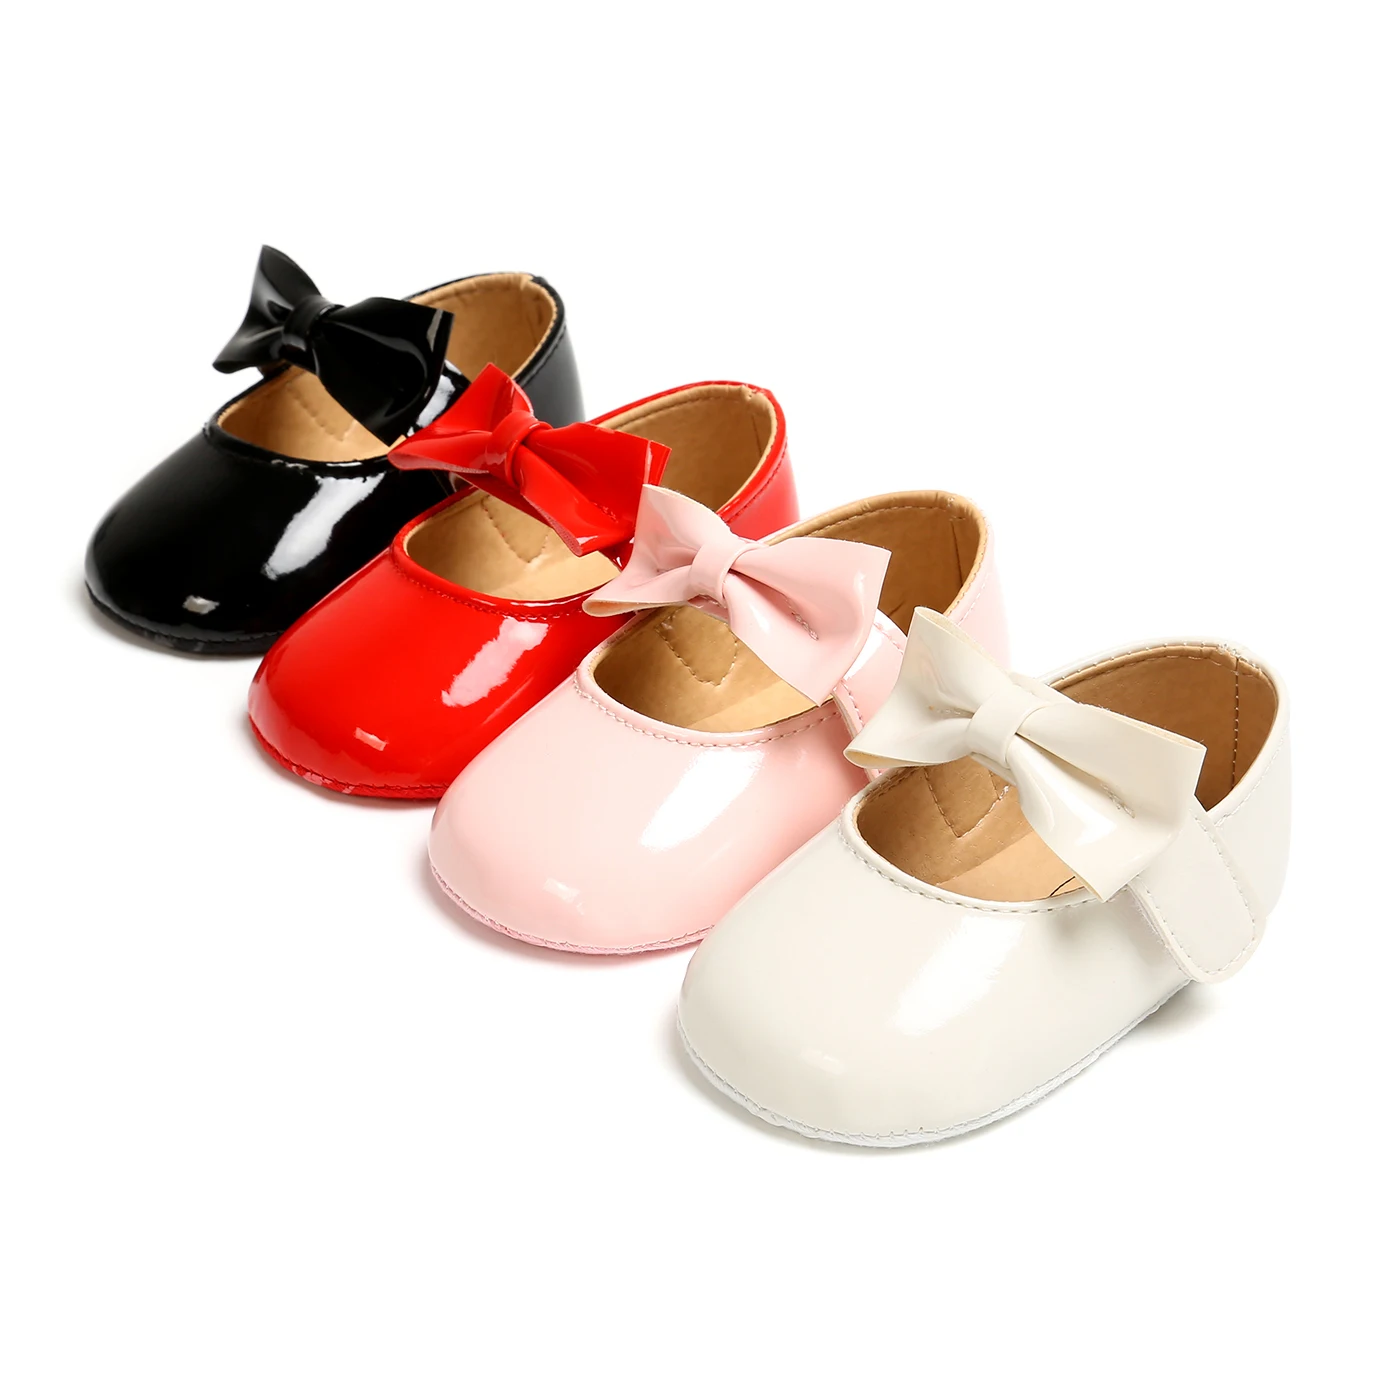 

2020 New designed PU Leather Bowknot colorful ballet princess dress 6 month baby girl shoes, 4 colors